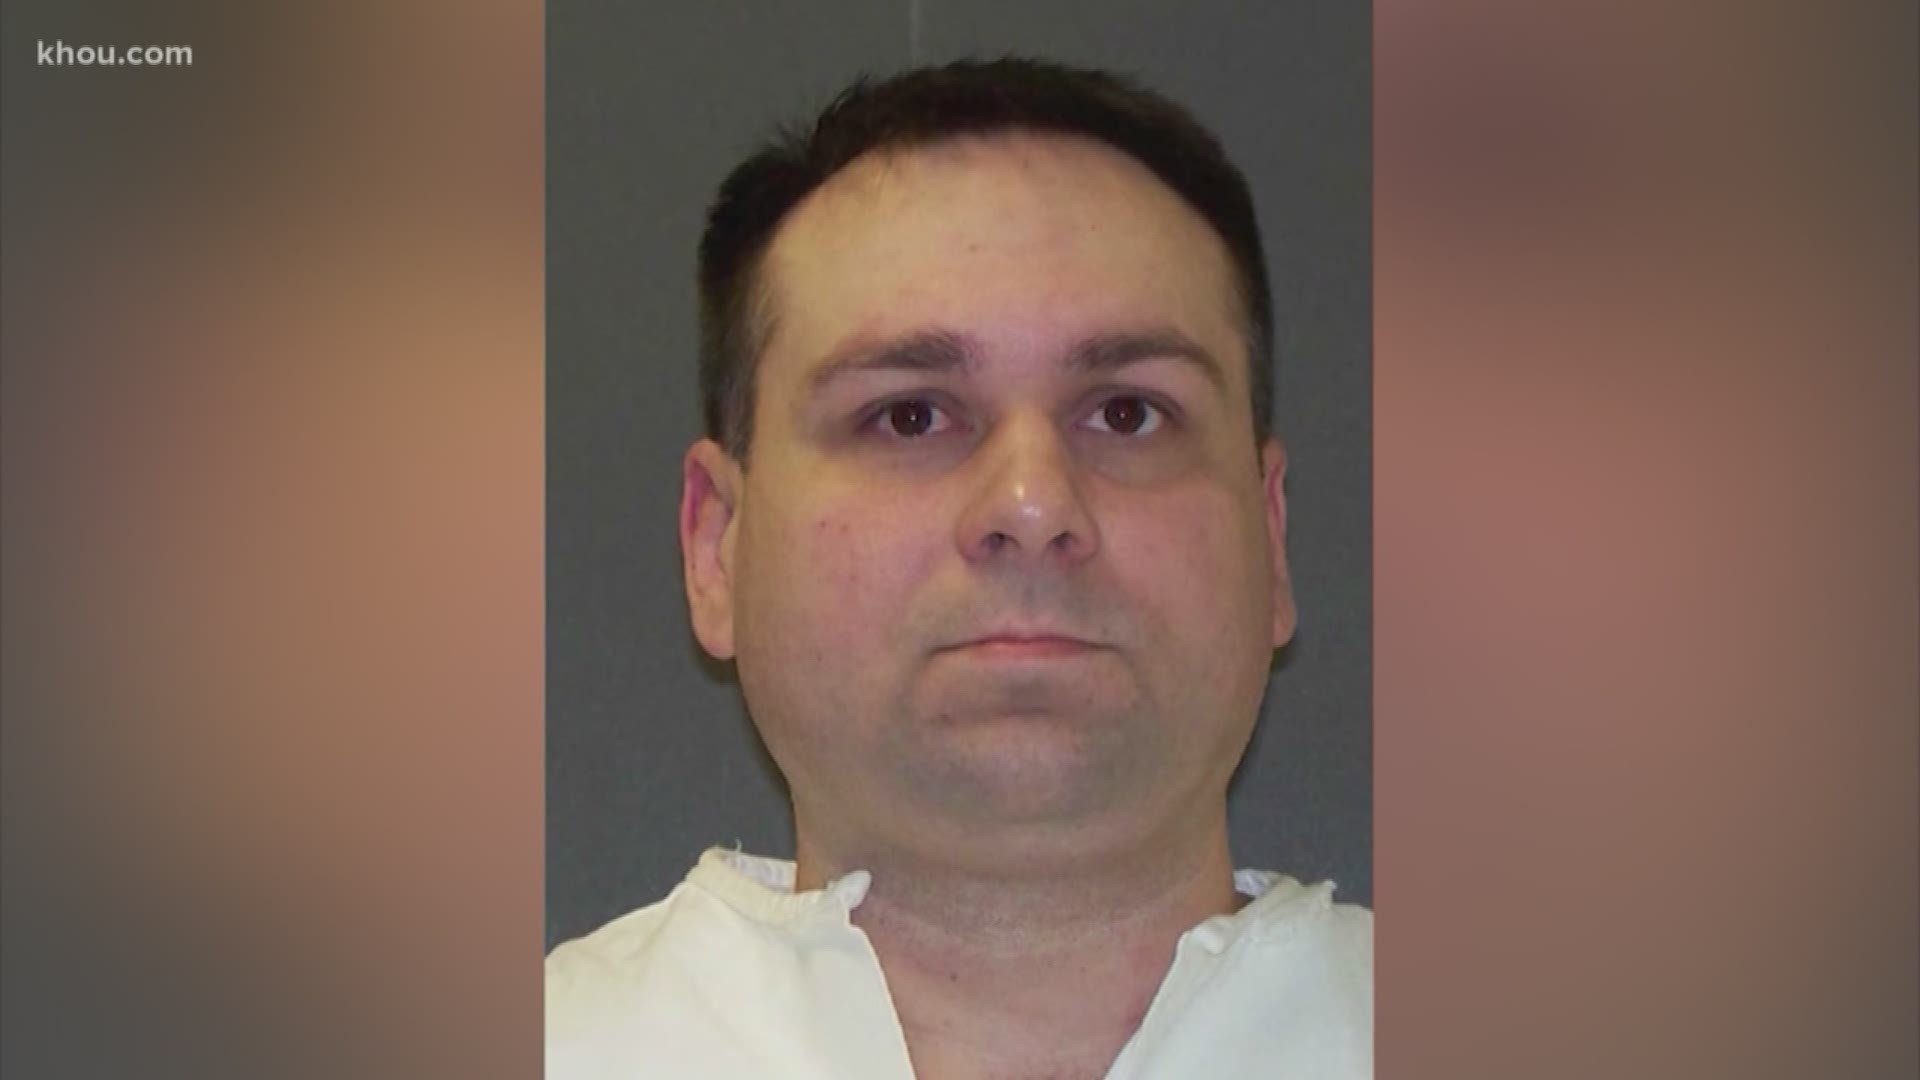 A killer convicted for one of the most gruesome hate crimes is set to die. John William King will be executed Wednesday, April 24 for the dragging death of James Byrd Jr.